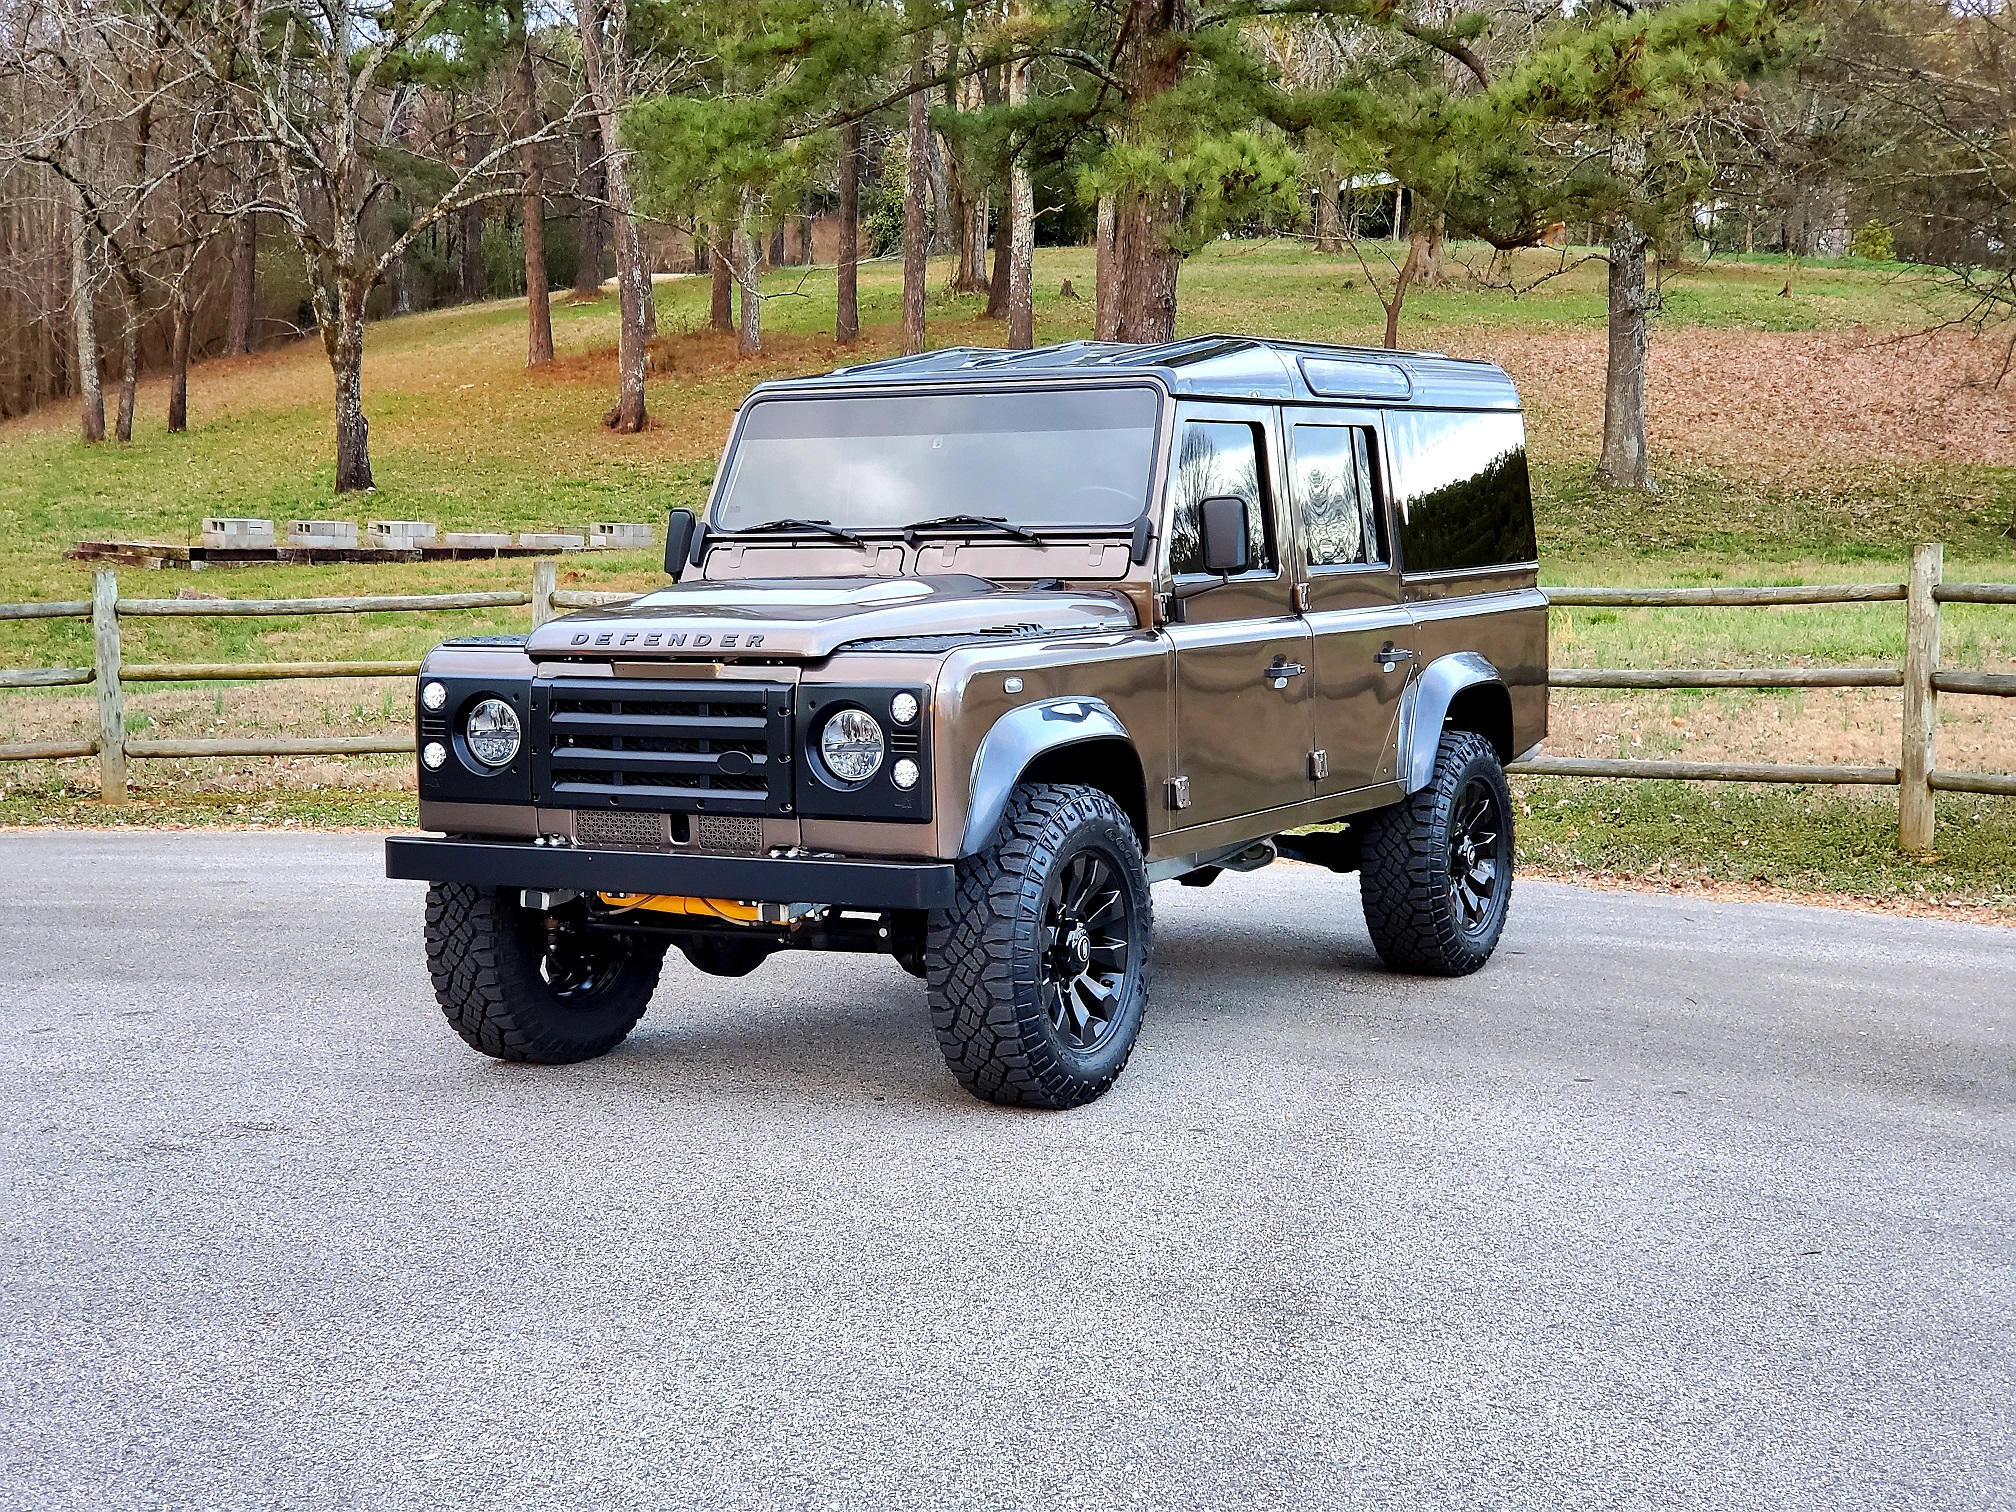 LS3-swapped Land Rover Defender Is an '80s Marauder